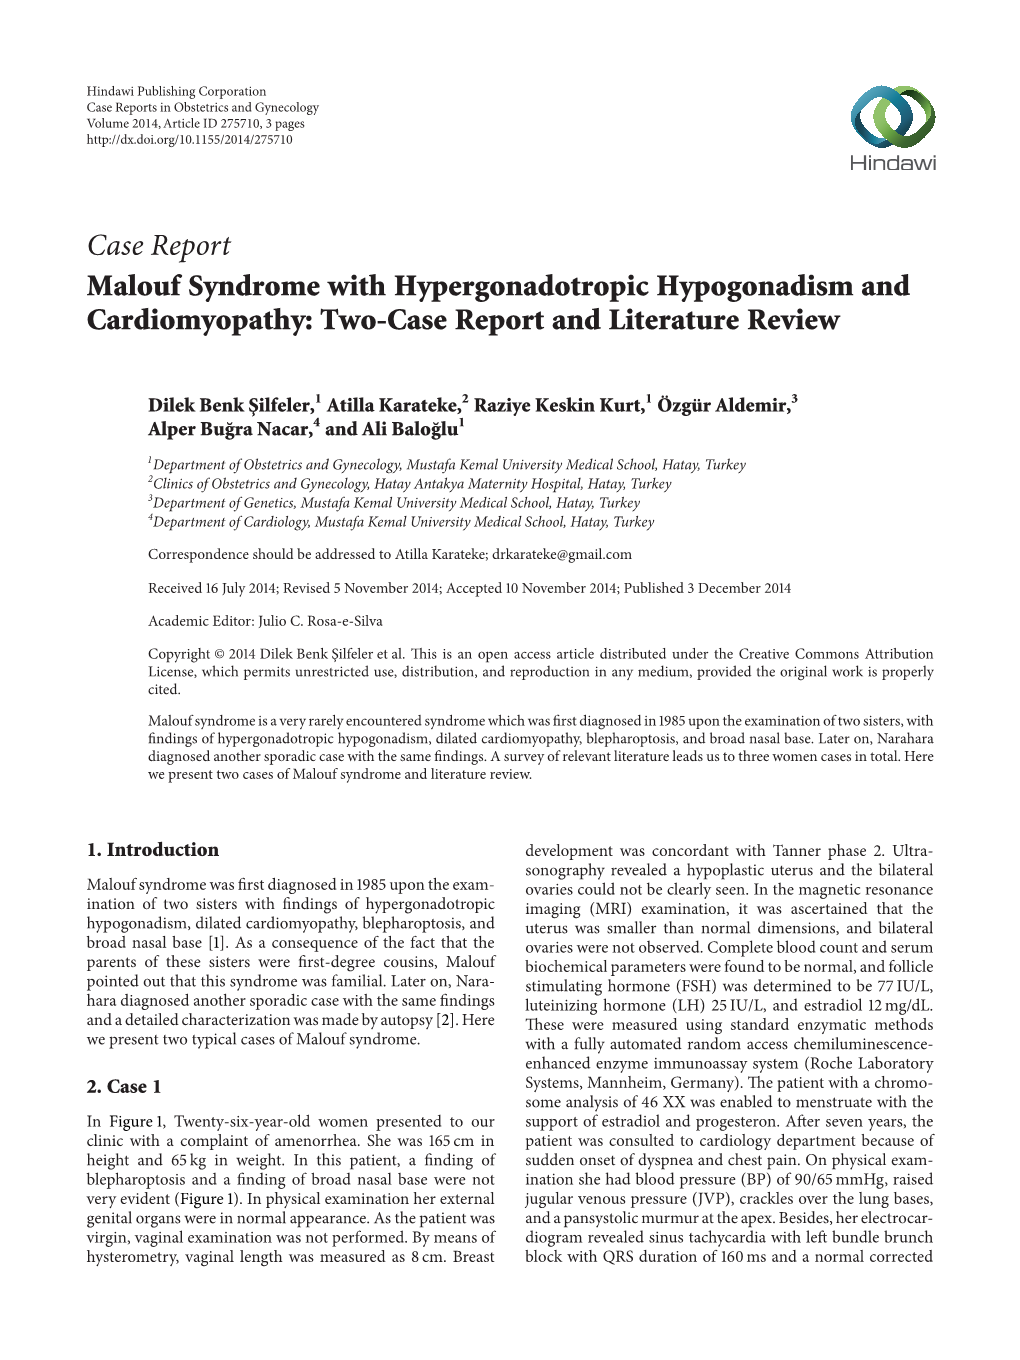 Malouf Syndrome with Hypergonadotropic Hypogonadism and Cardiomyopathy: Two-Case Report and Literature Review